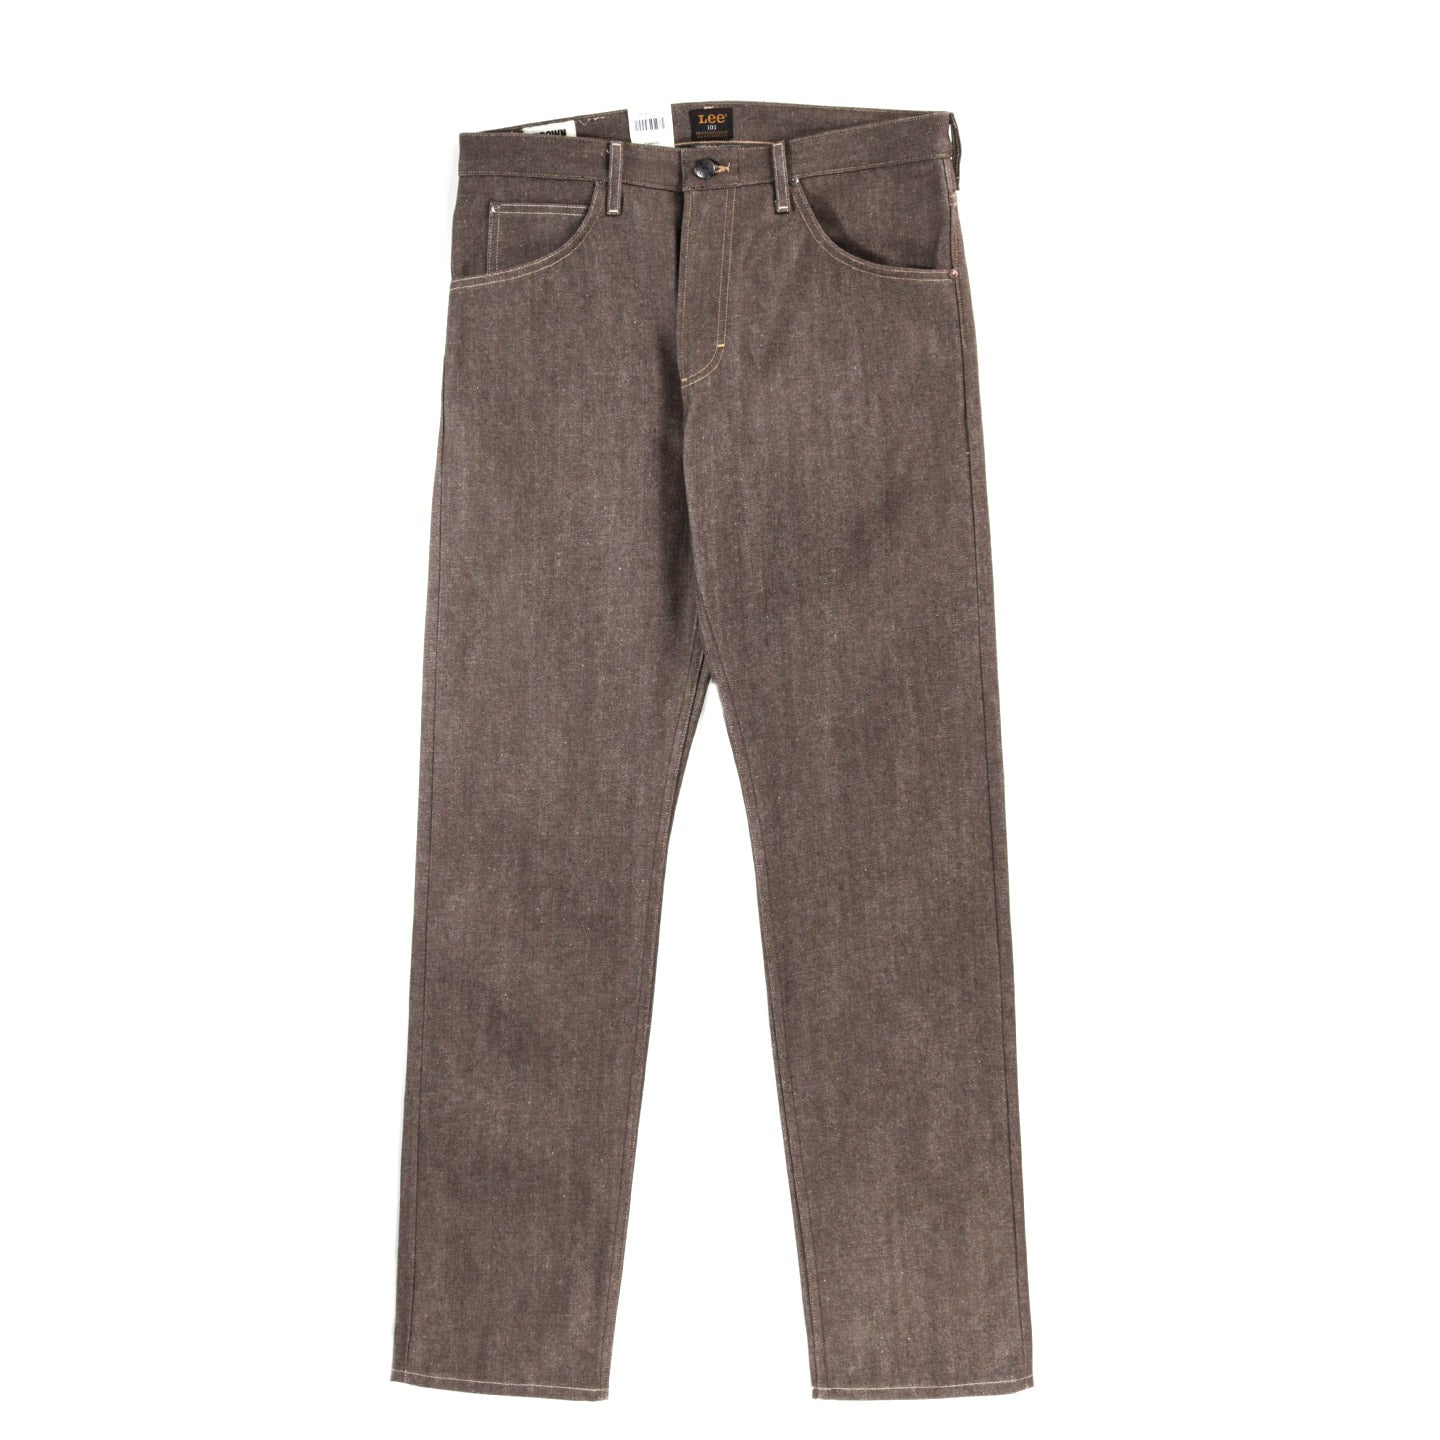 LEE 101Z BROWN SELVAGE DRY | TODAY CLOTHING